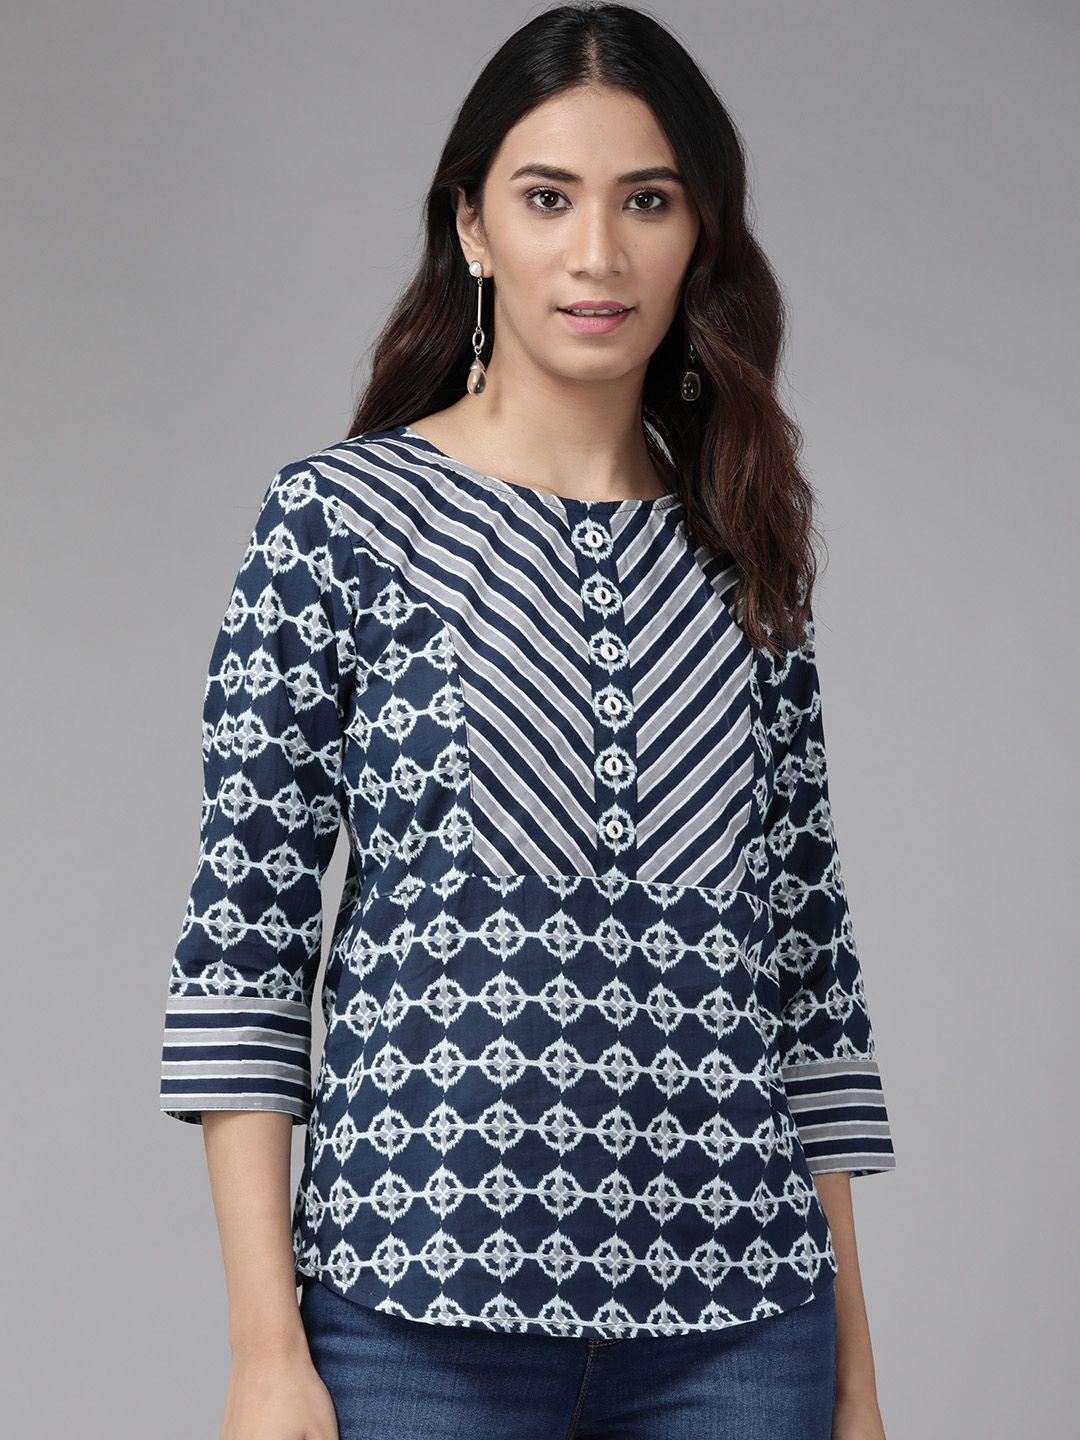 YASH GALLERY Navy Blue & White Printed Top